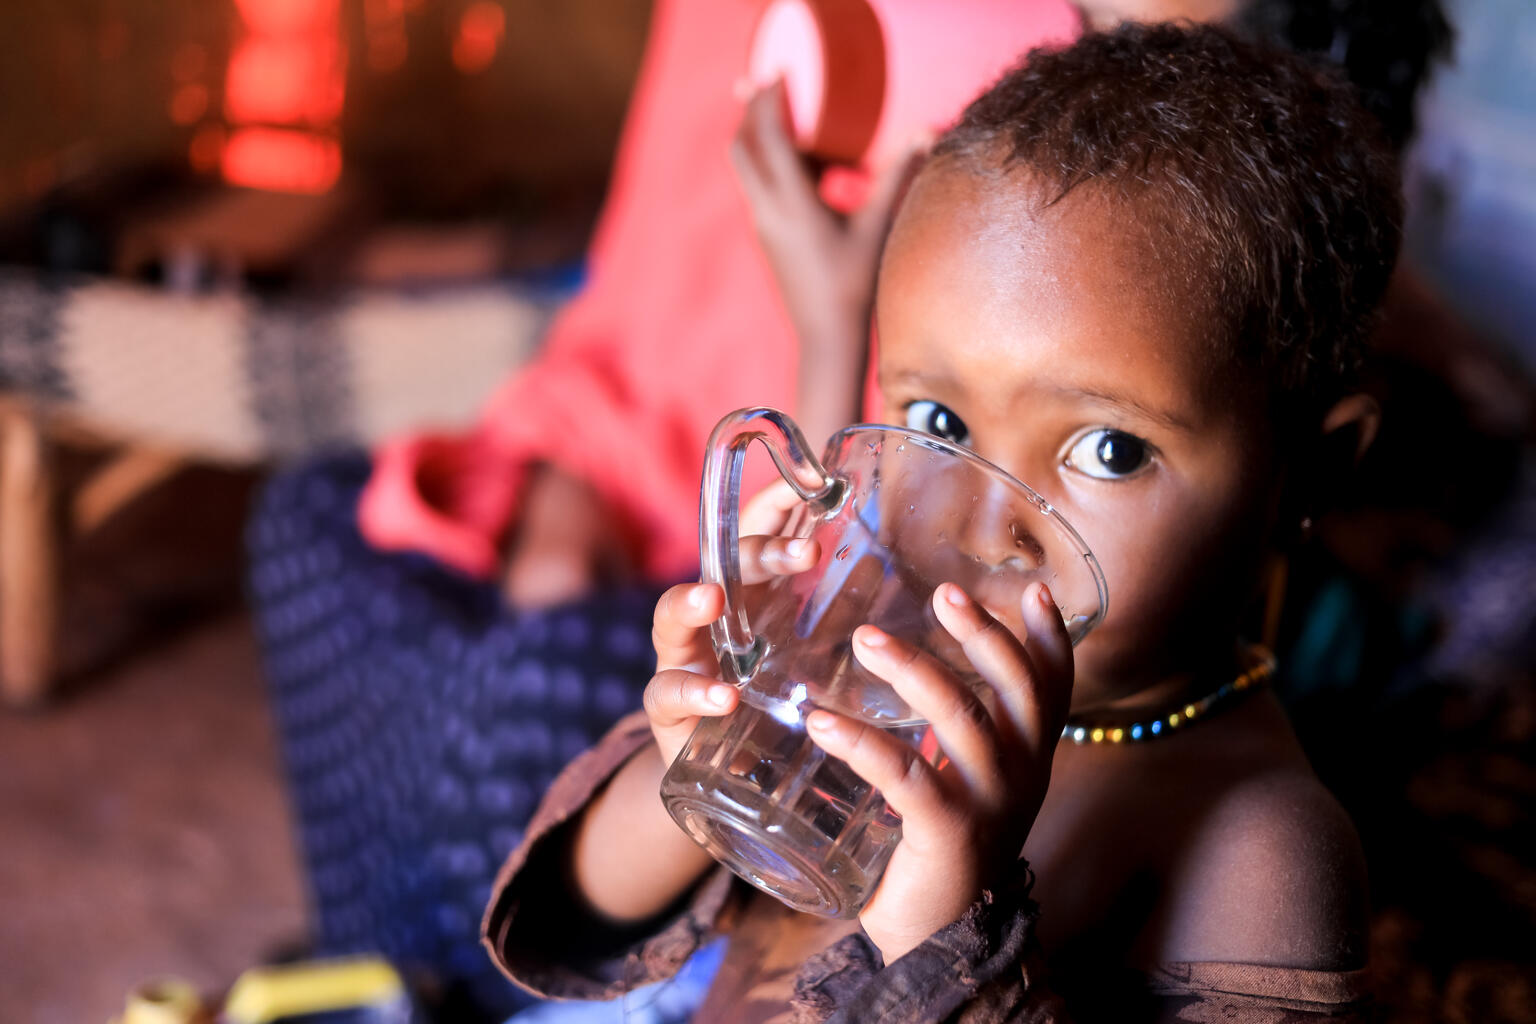 Hibo, 2 years old drinks water inside his home in Somalia. East Africa Crisis